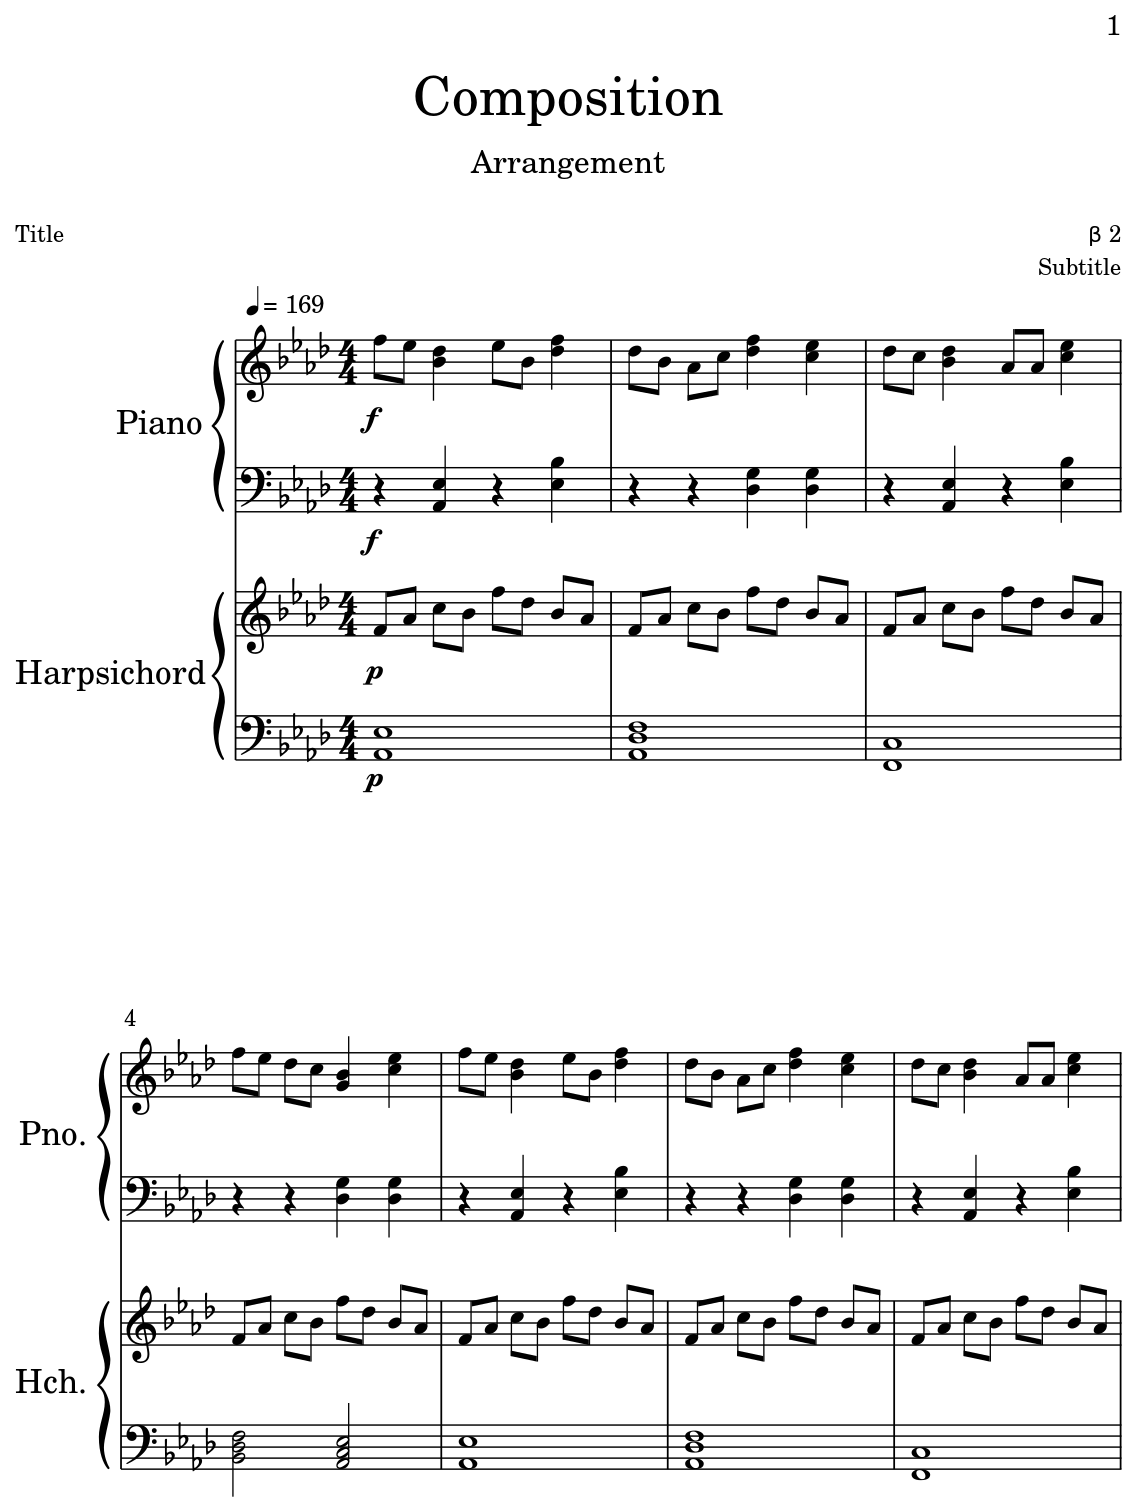 Download Composition - Sheet music for Piano, Harpsichord